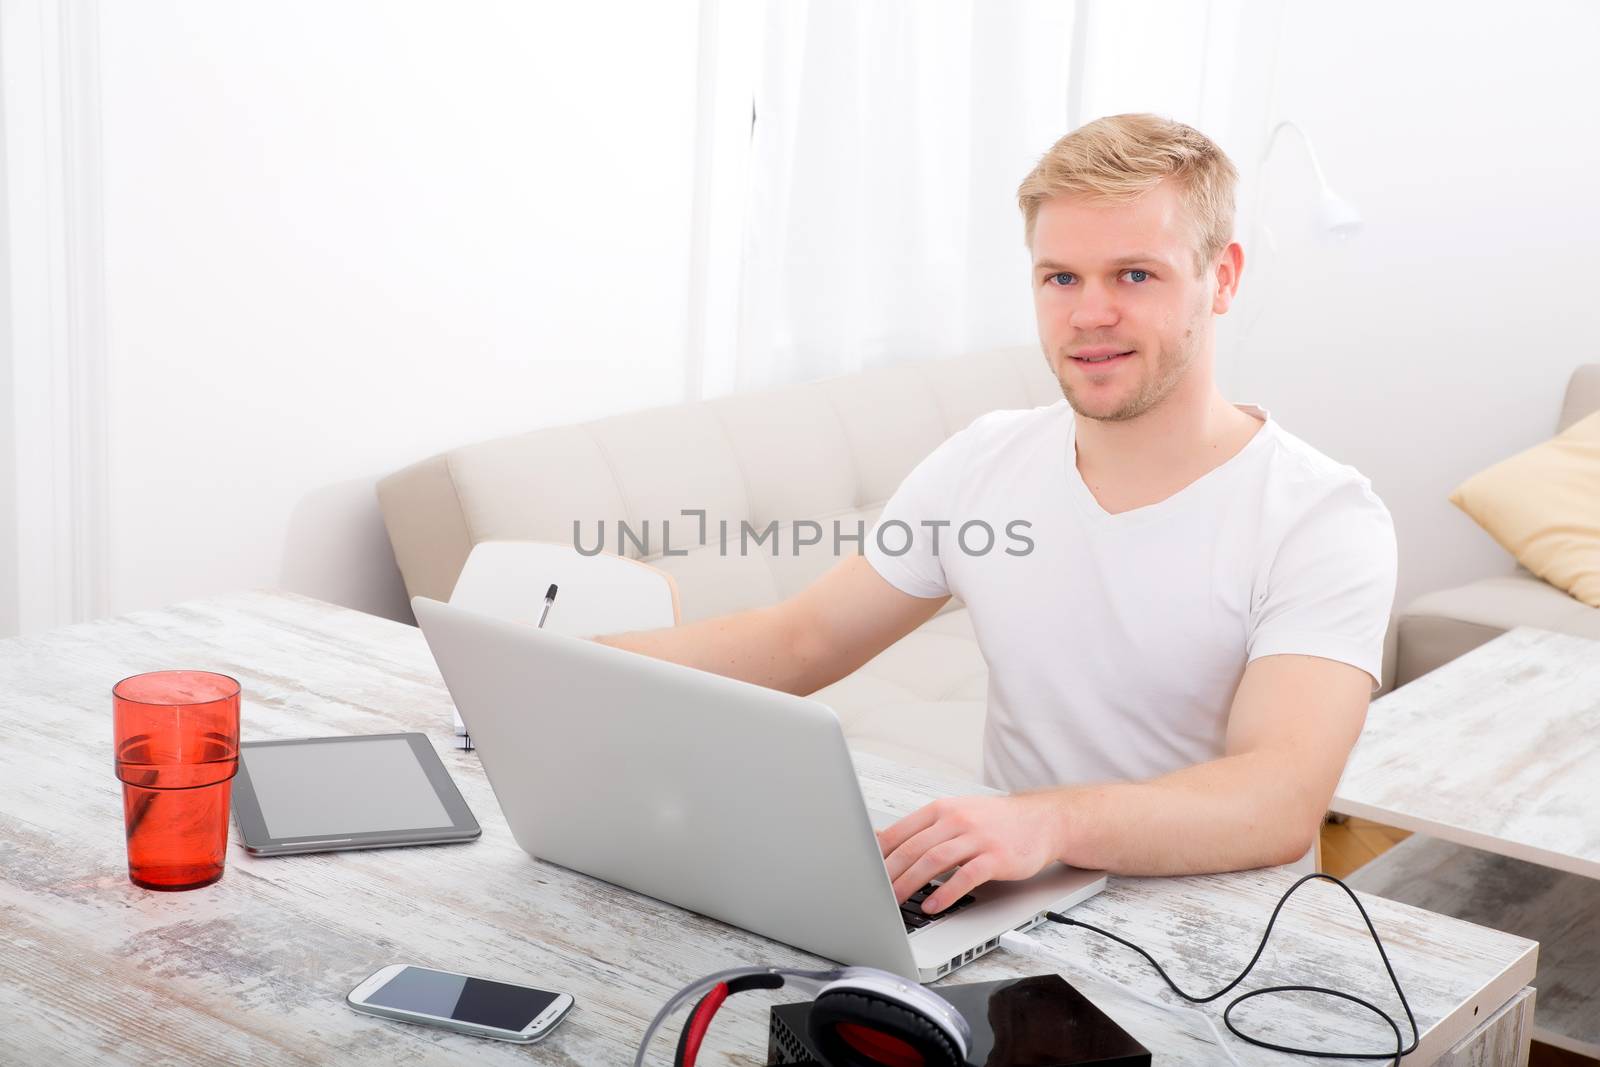 A young caucasian man working in his home office.